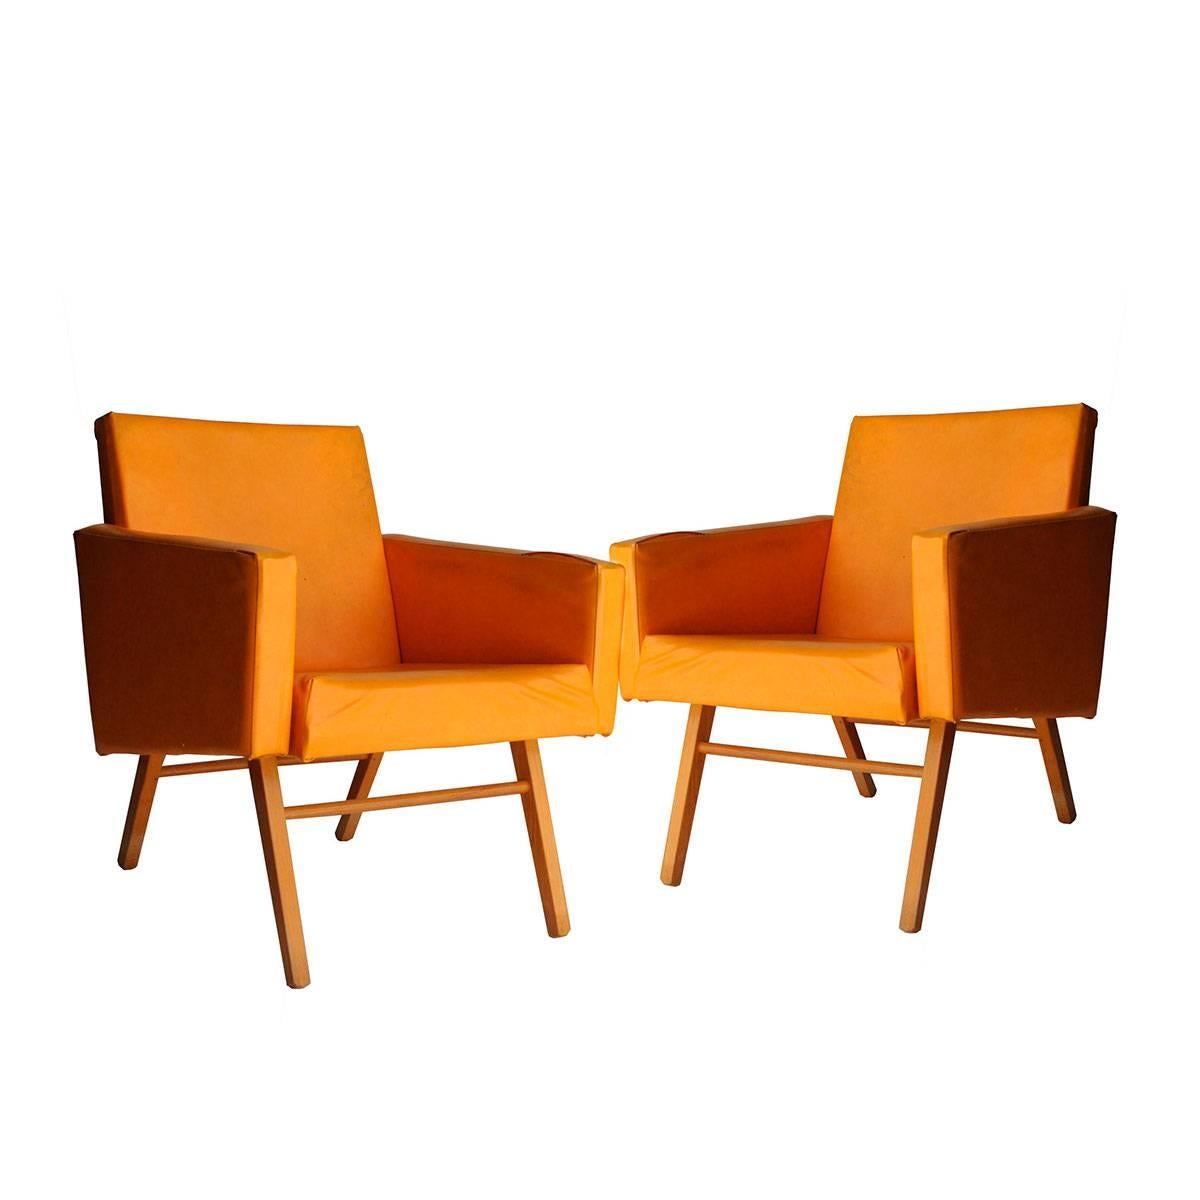 Oak and Yellow Faux Leather Armchairs, Czech Republic, 1960